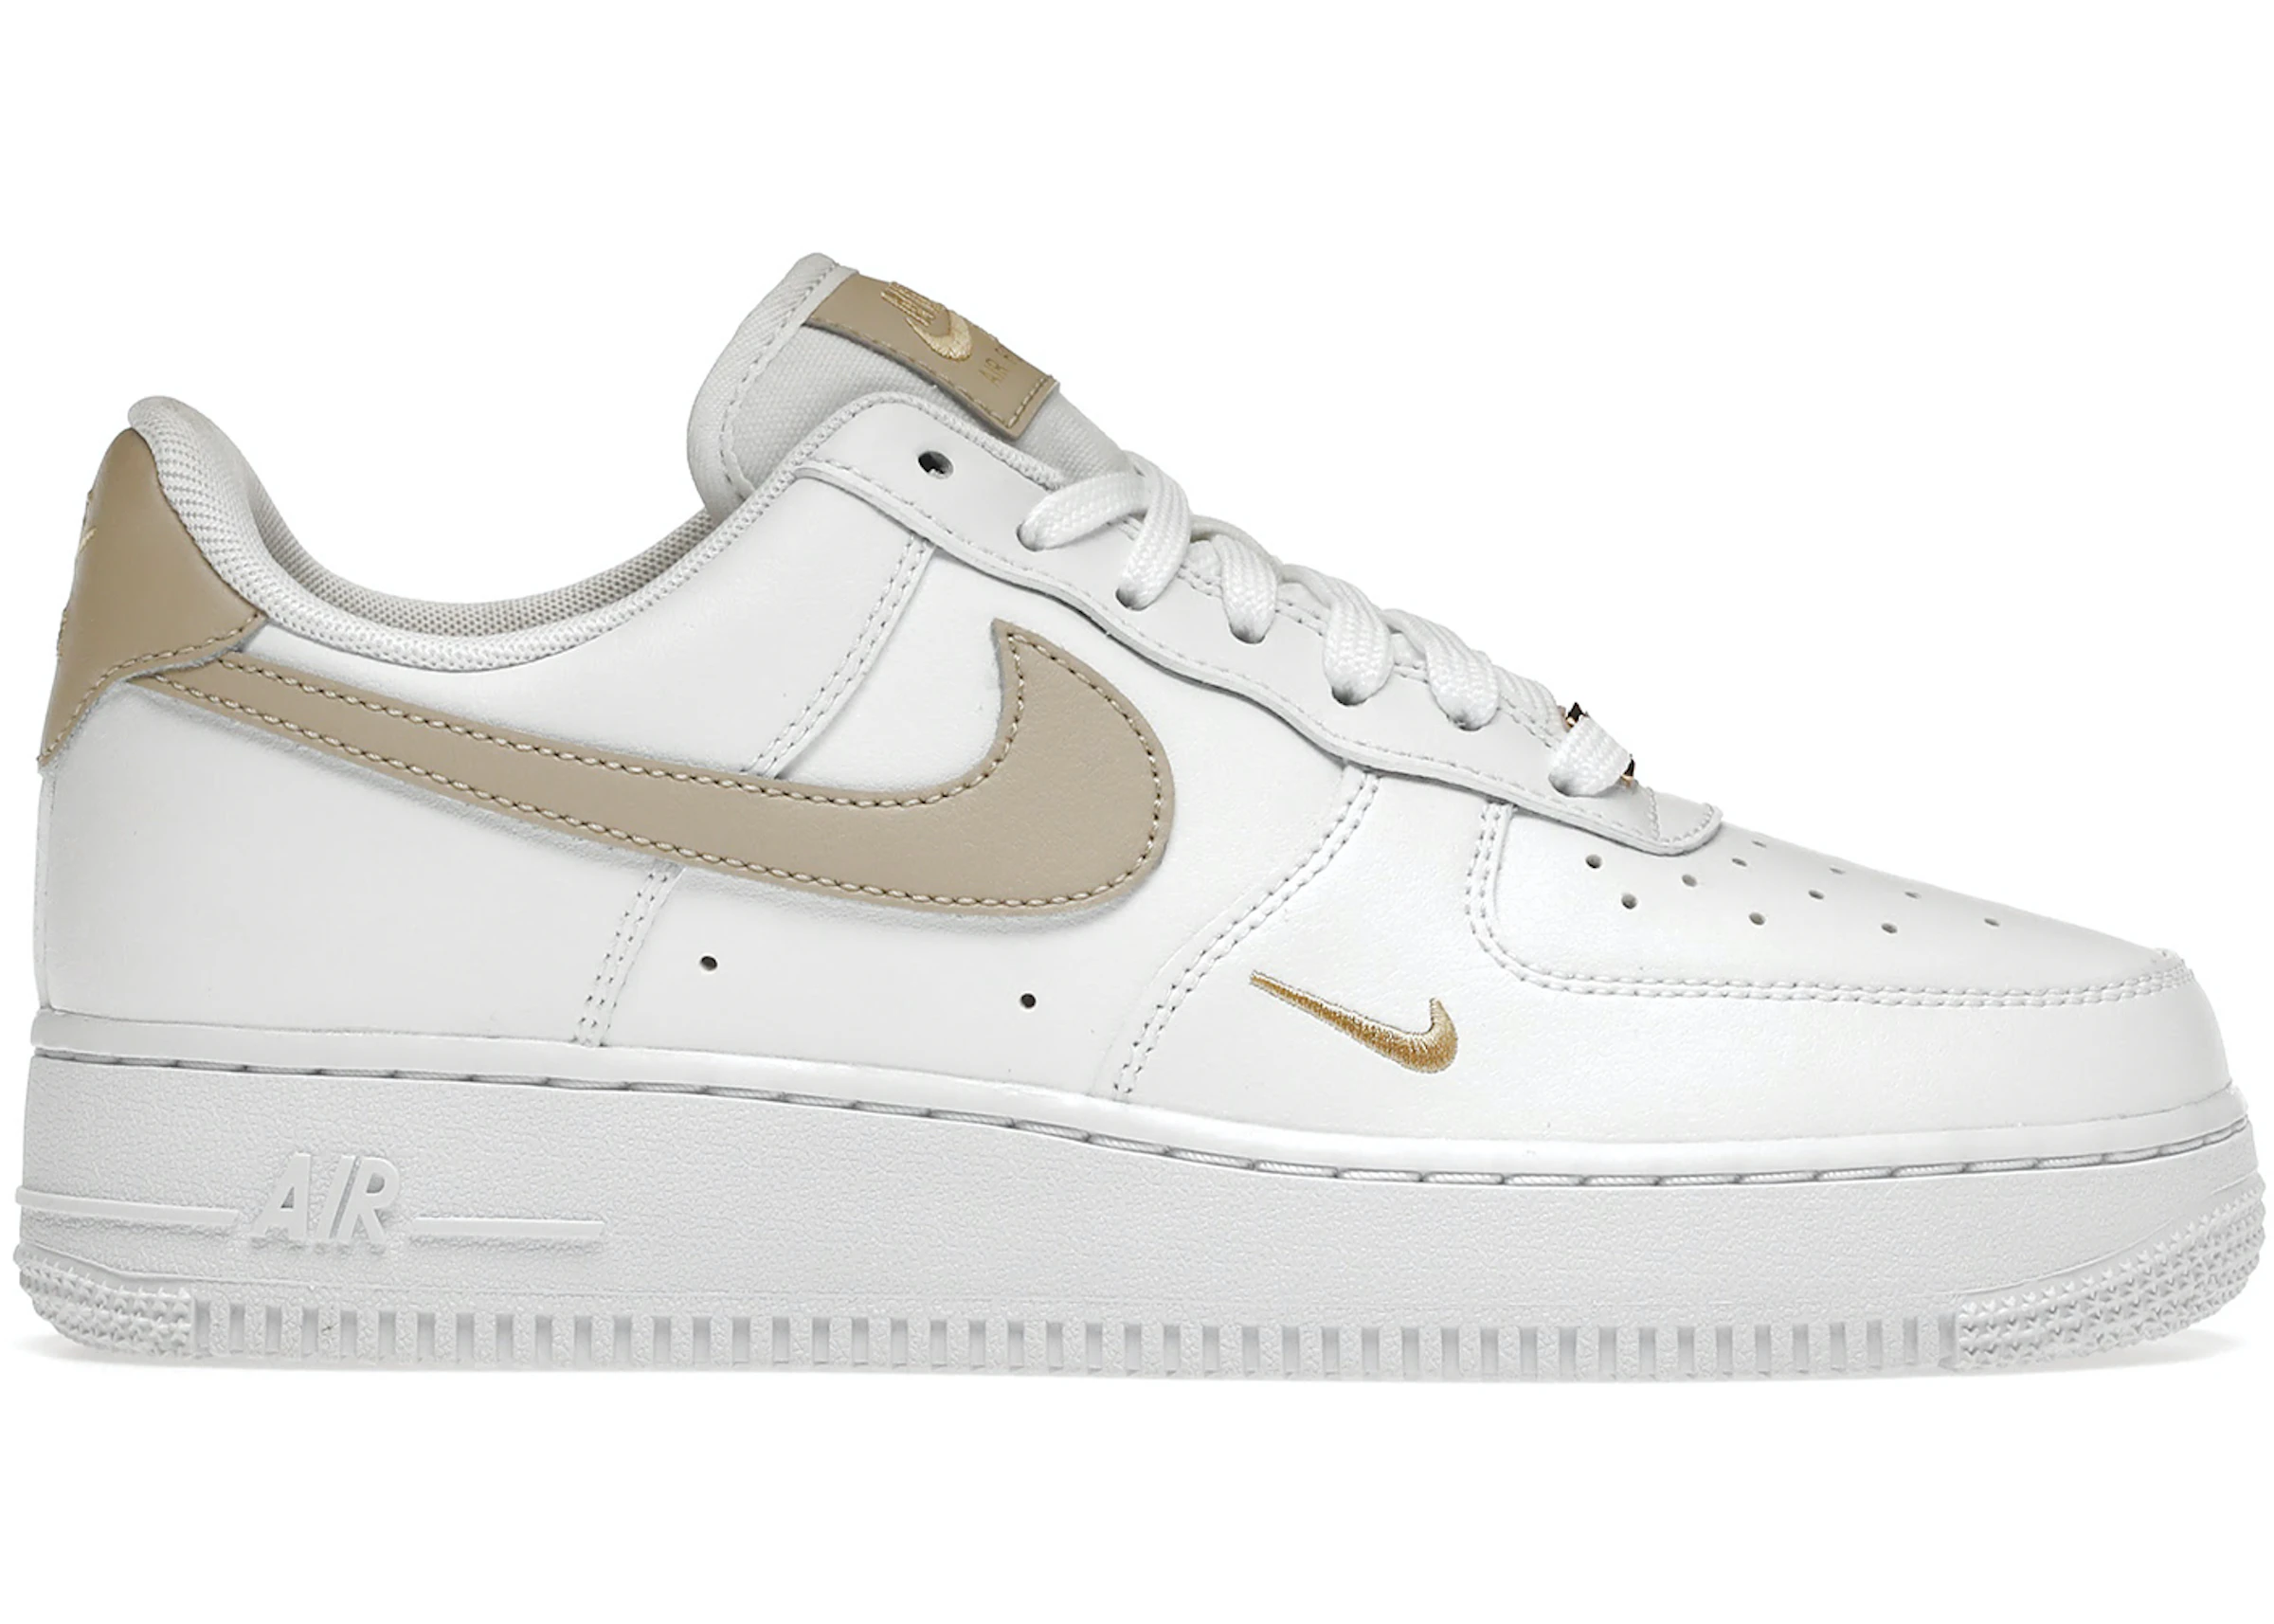 shorthand Amount of bankruptcy Nike Air Force 1 Low '07 Essential White Beige (W) - CZ0270-105 - US